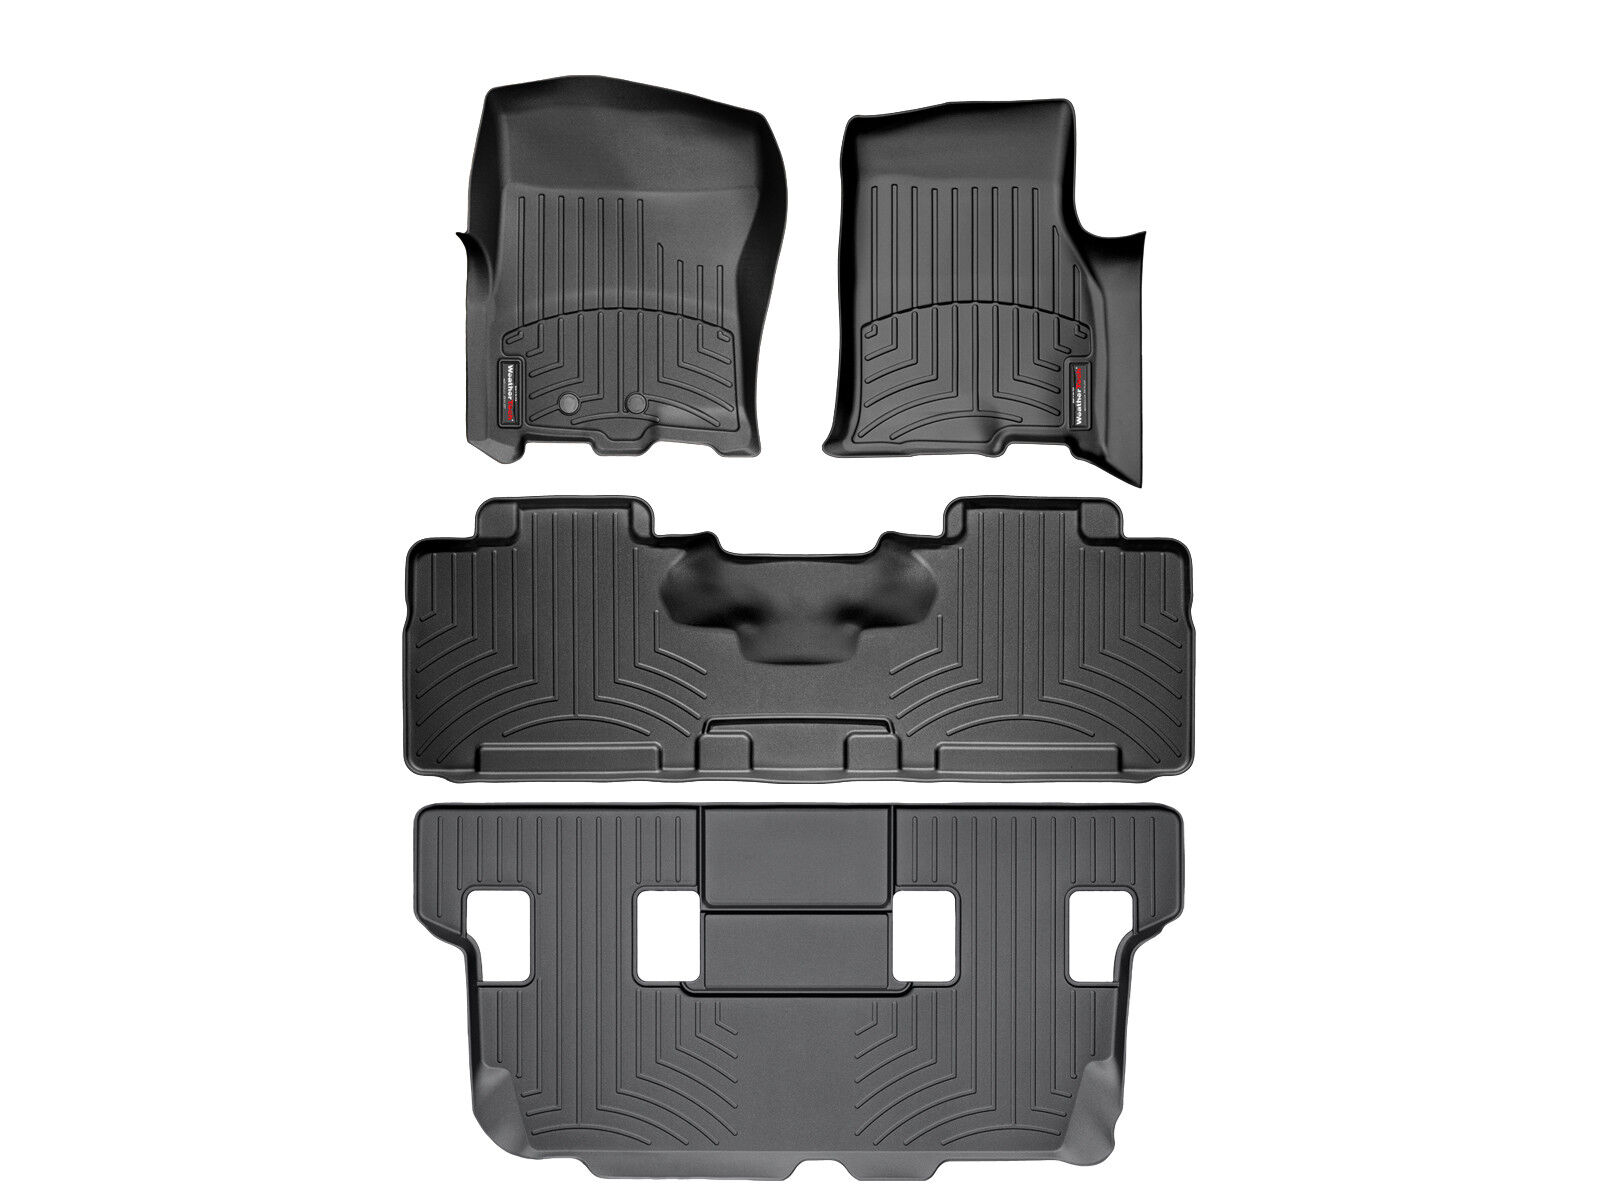 WeatherTech FloorLiner for Expedition/Navigator w/Bench - 1st/2nd/3rd Row- Black